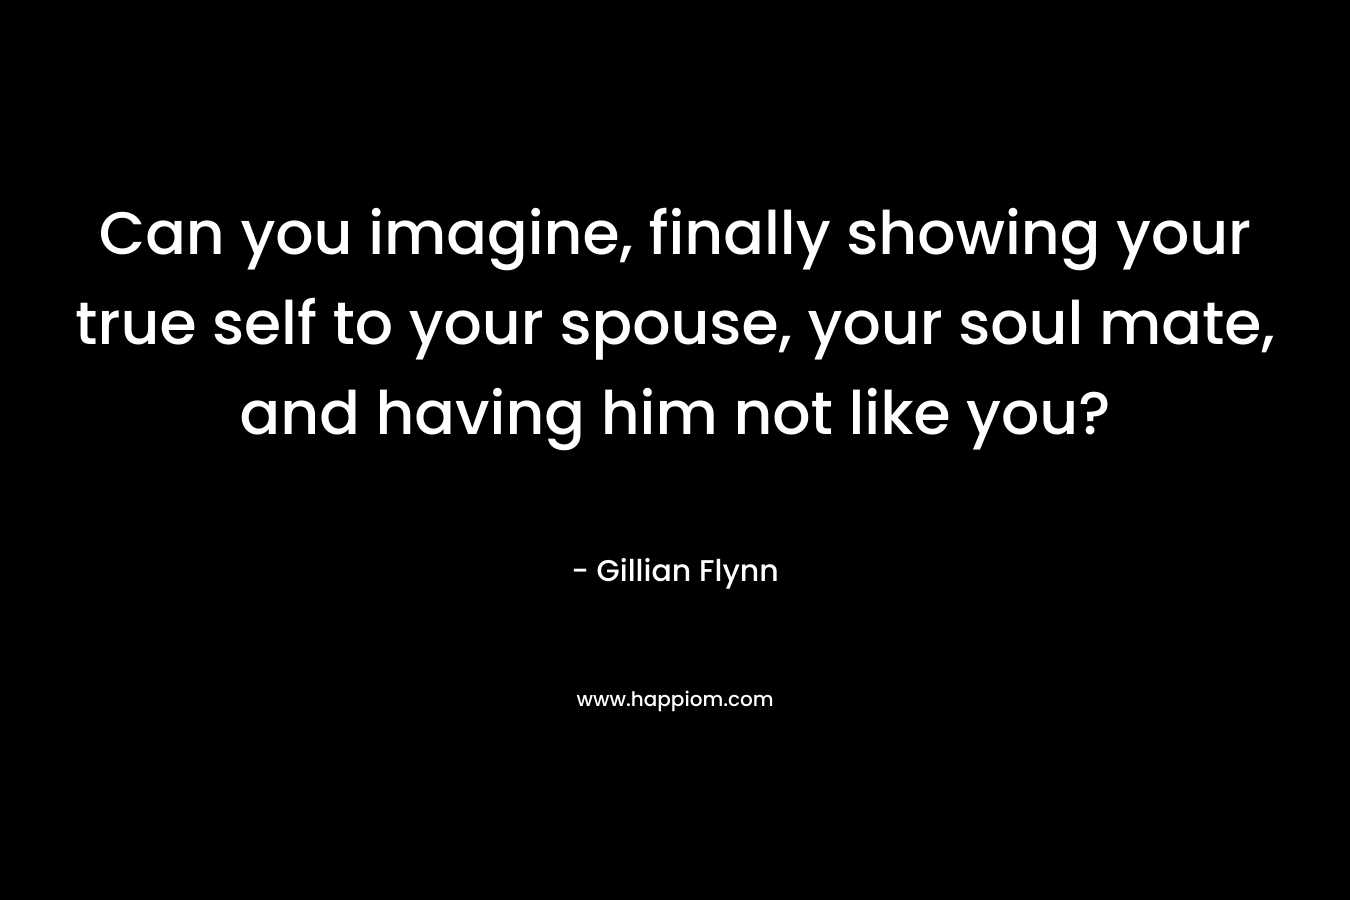 Can you imagine, finally showing your true self to your spouse, your soul mate, and having him not like you?